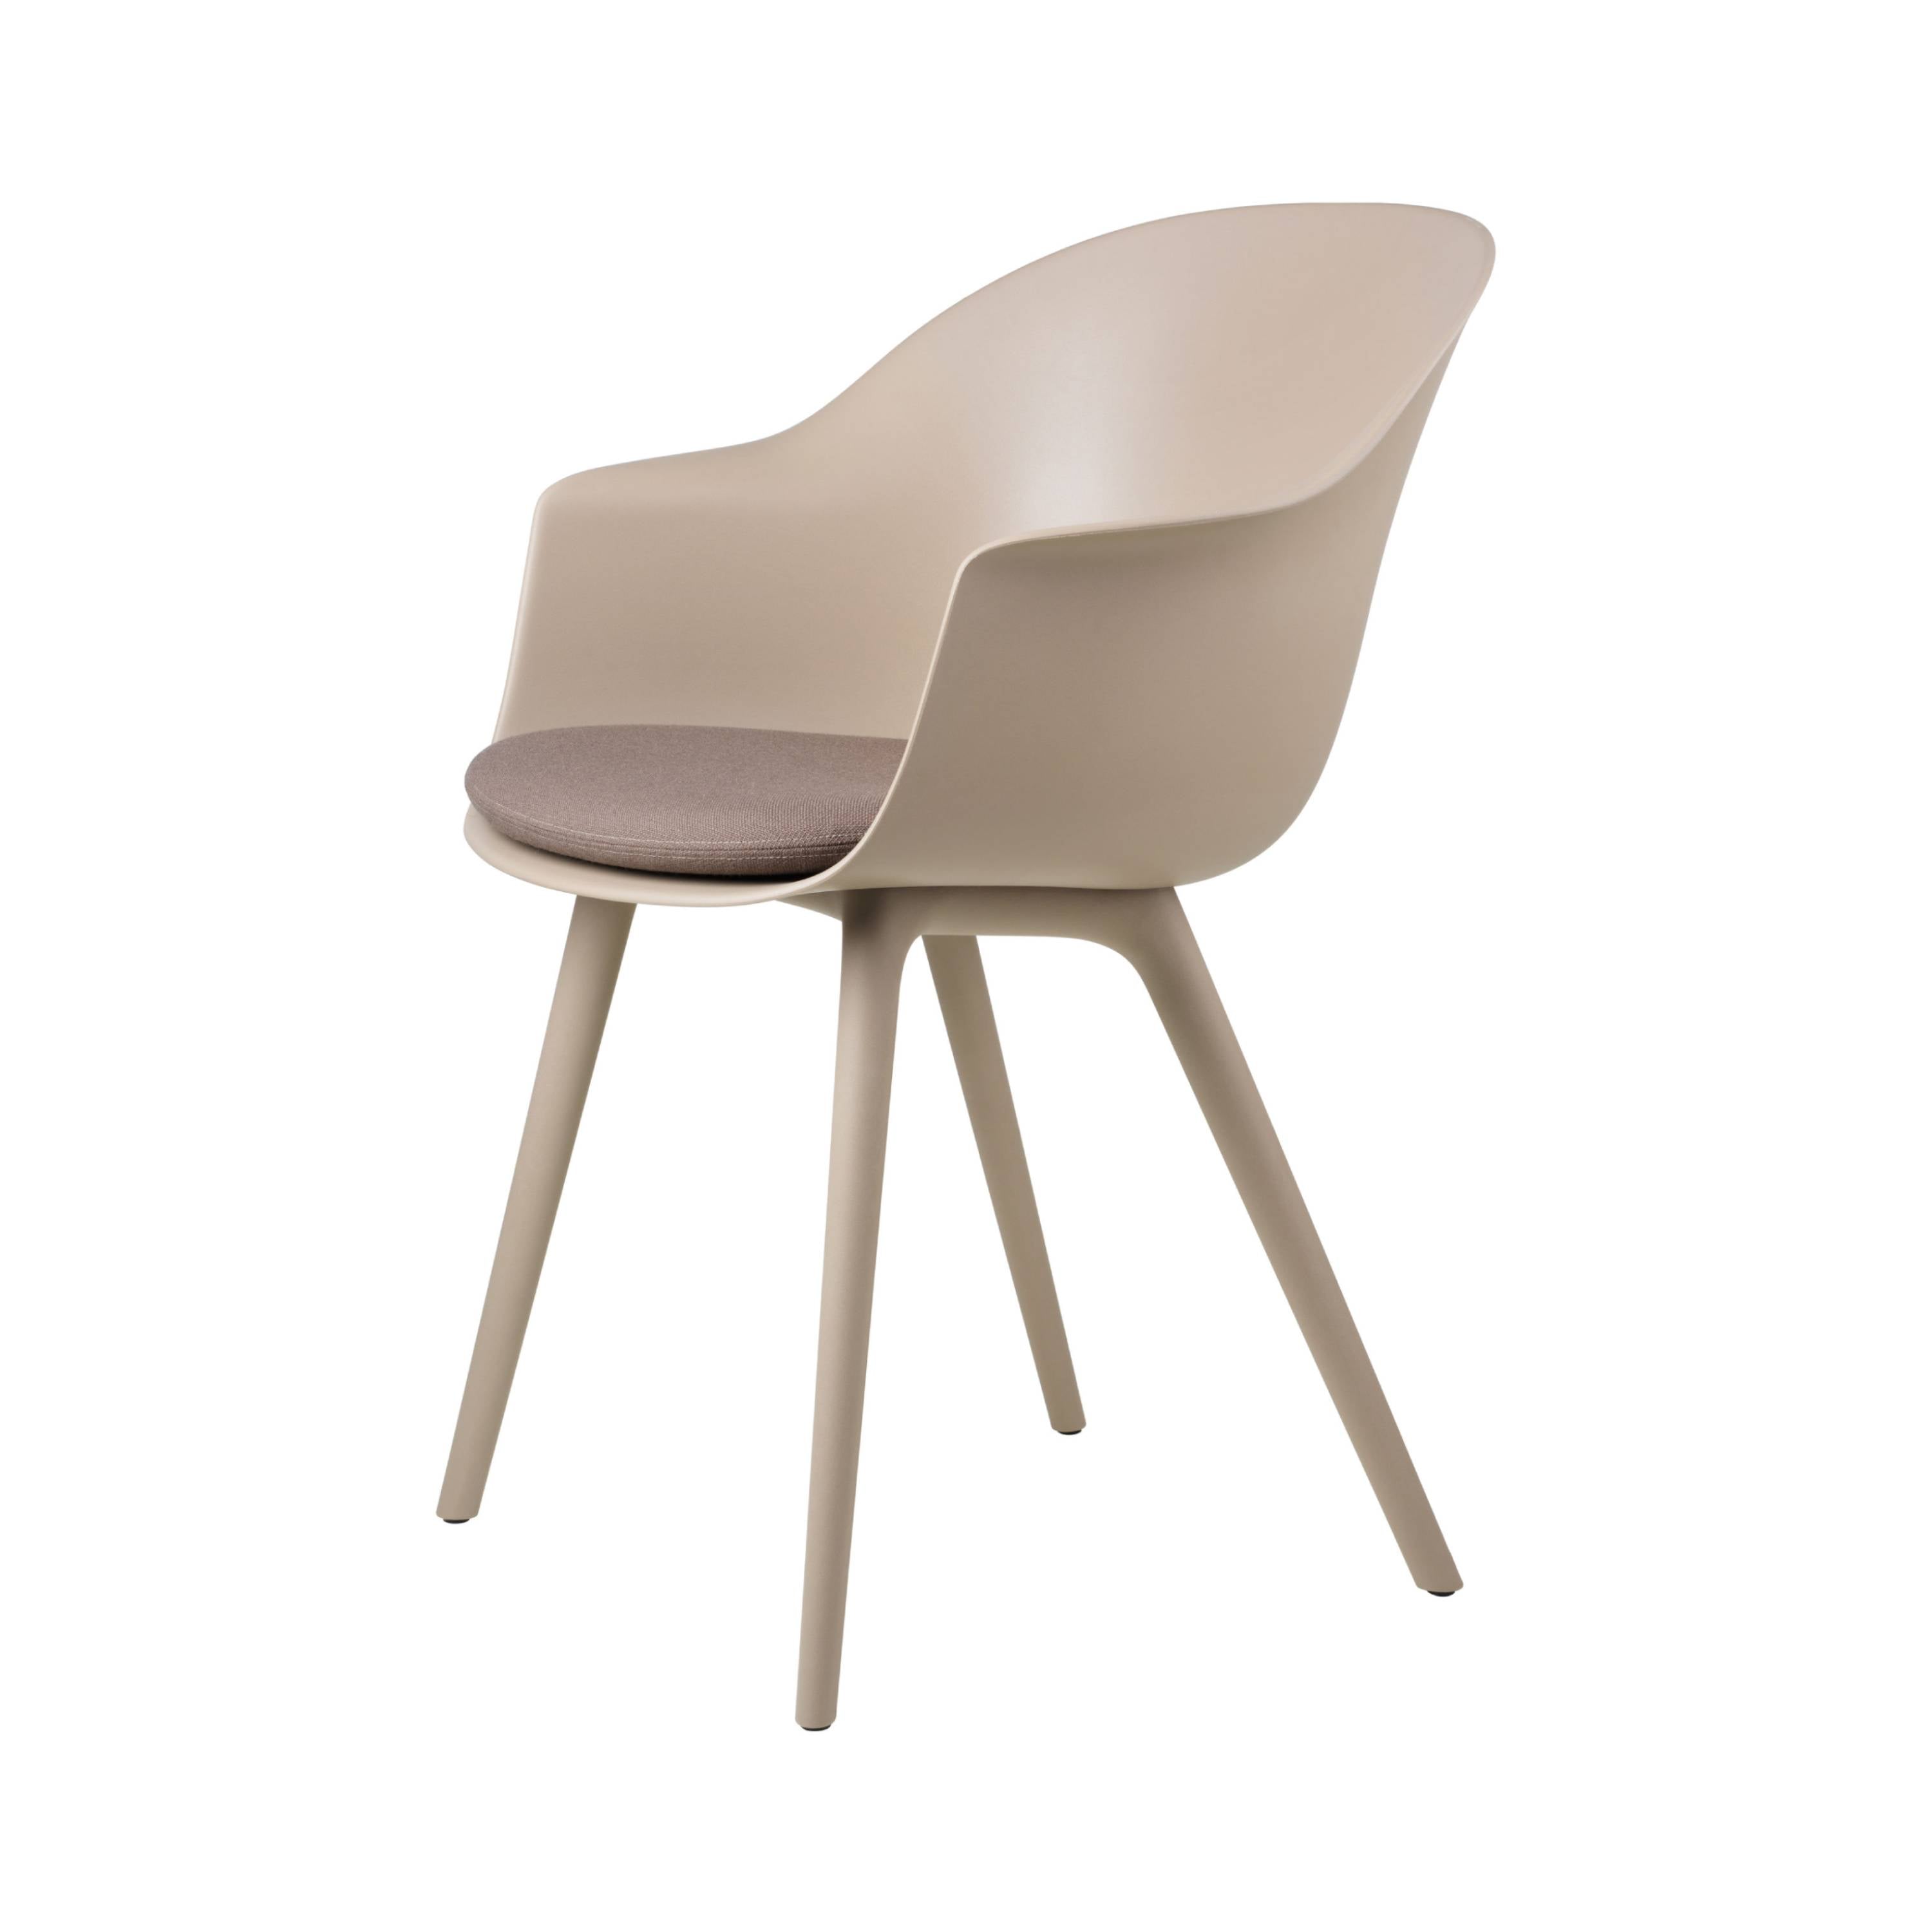 Bat Dining Chair: Plastic Base with Cushion + New Beige